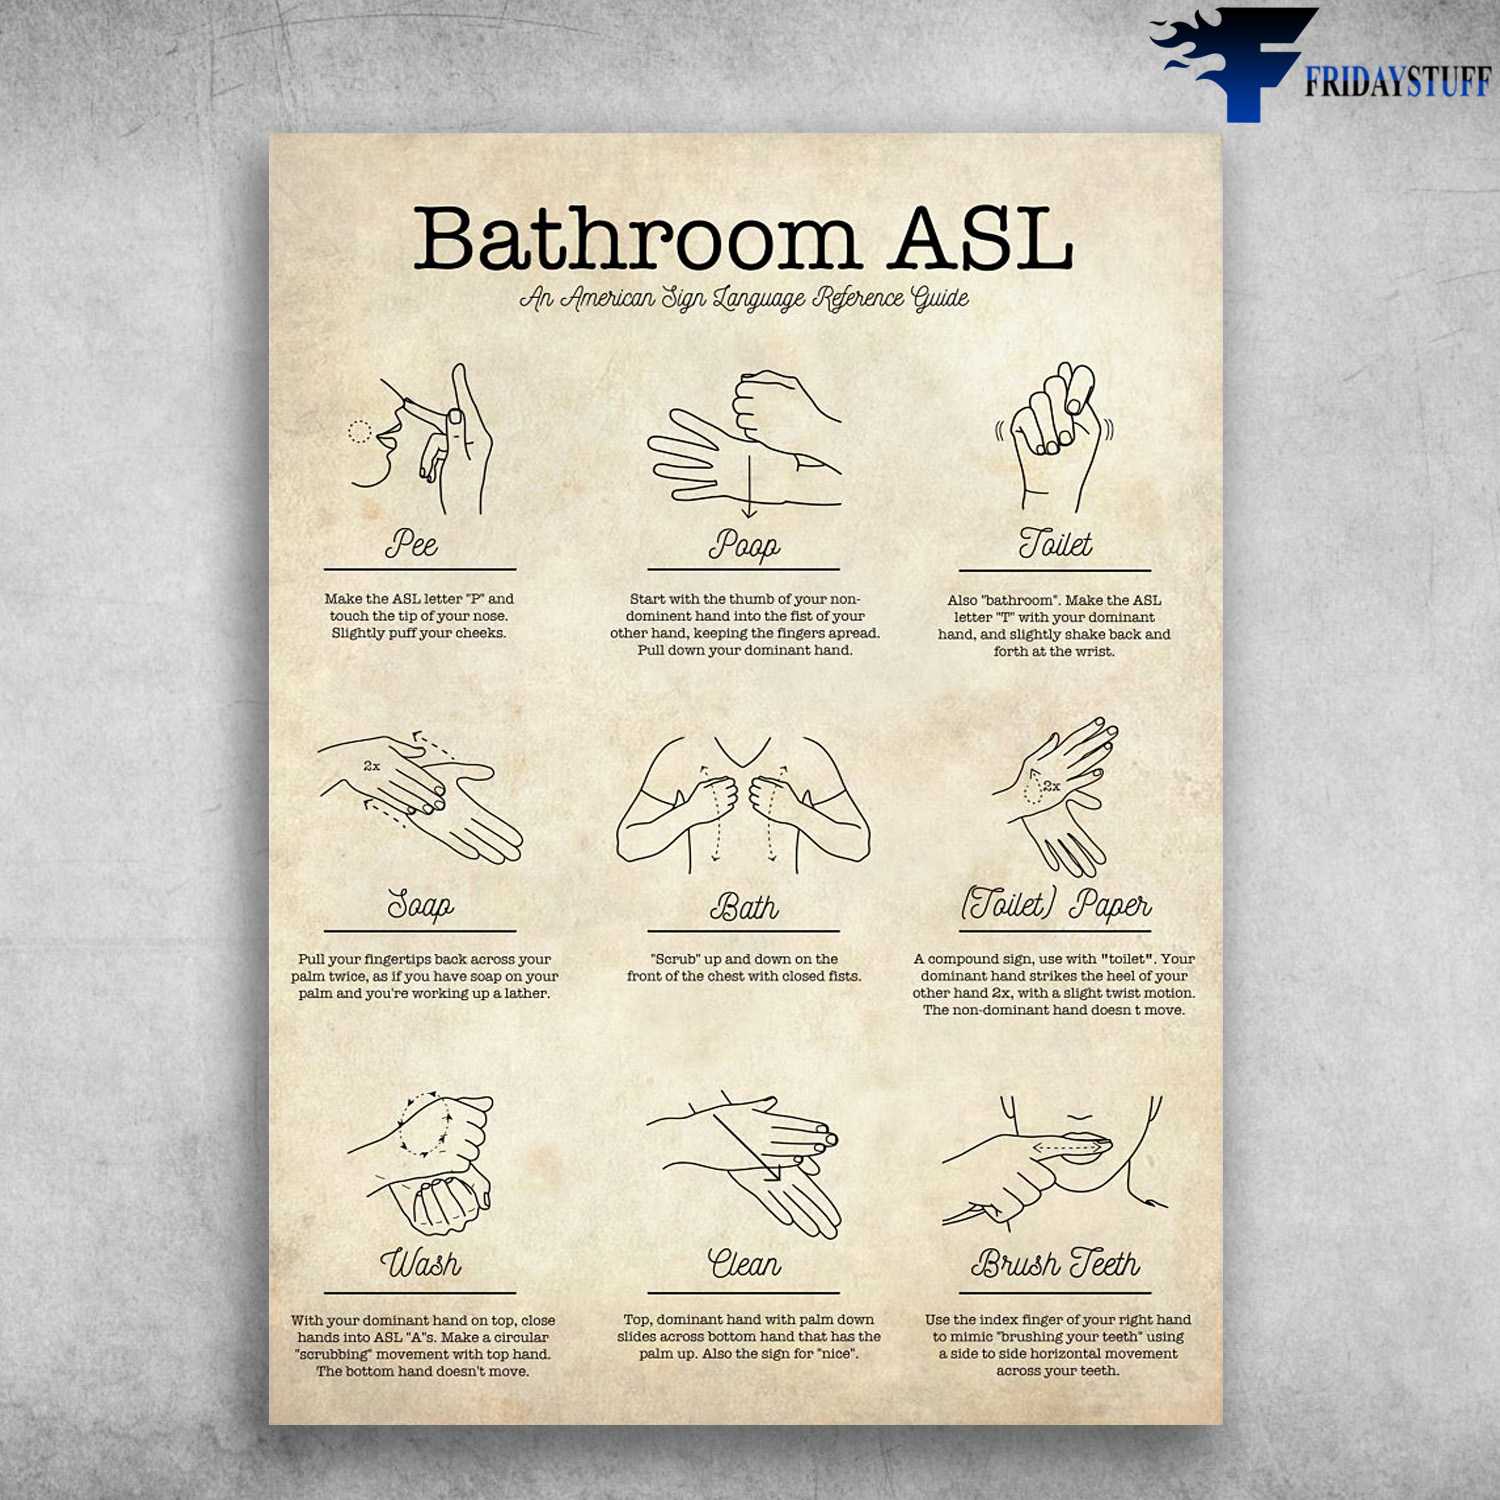 Sign Language, Bathroom ASL, An American Sign Language Reference Guide